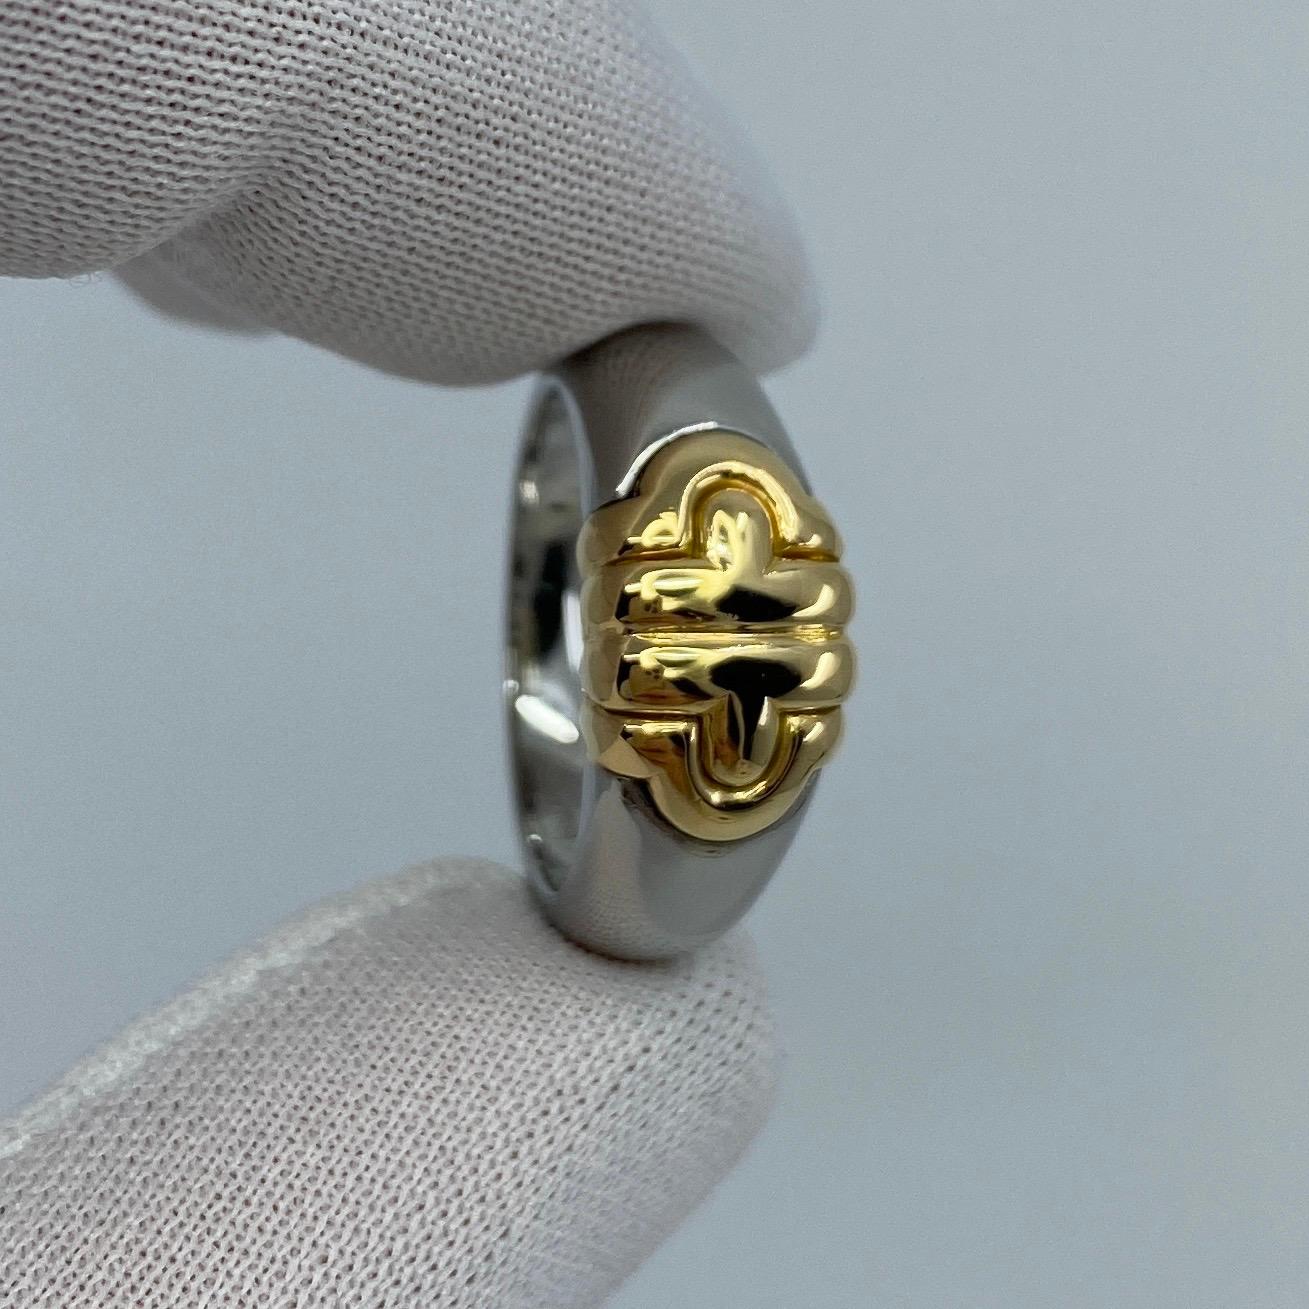 Rare Vintage Bvlgari Parentesi 'Signet Style' Italian Made Ring.

A beautiful vintage 18k yellow gold & steel ring with iconic Bvlgari Parentesi design.

Ring size: UK L1/2 - US 6.25 - EU 52
Ring sizing is possible.

This ring has been